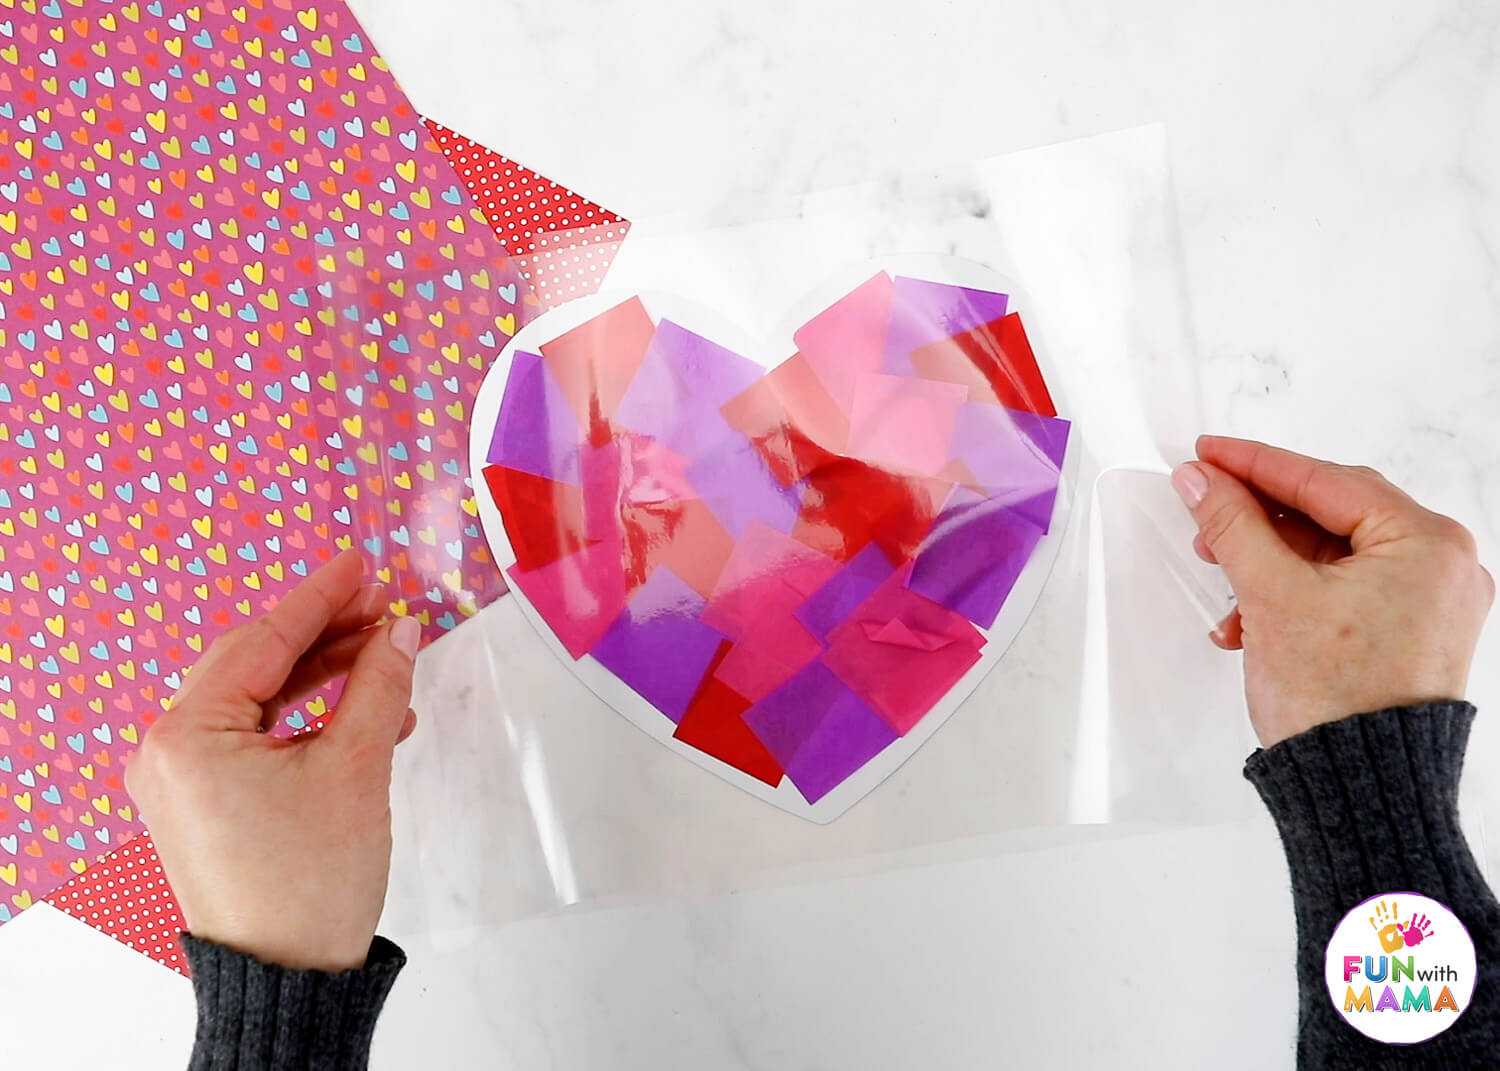 A self-laminating sheet being placed on top of a heart frame filled with pink, red and purple tissue paper squares